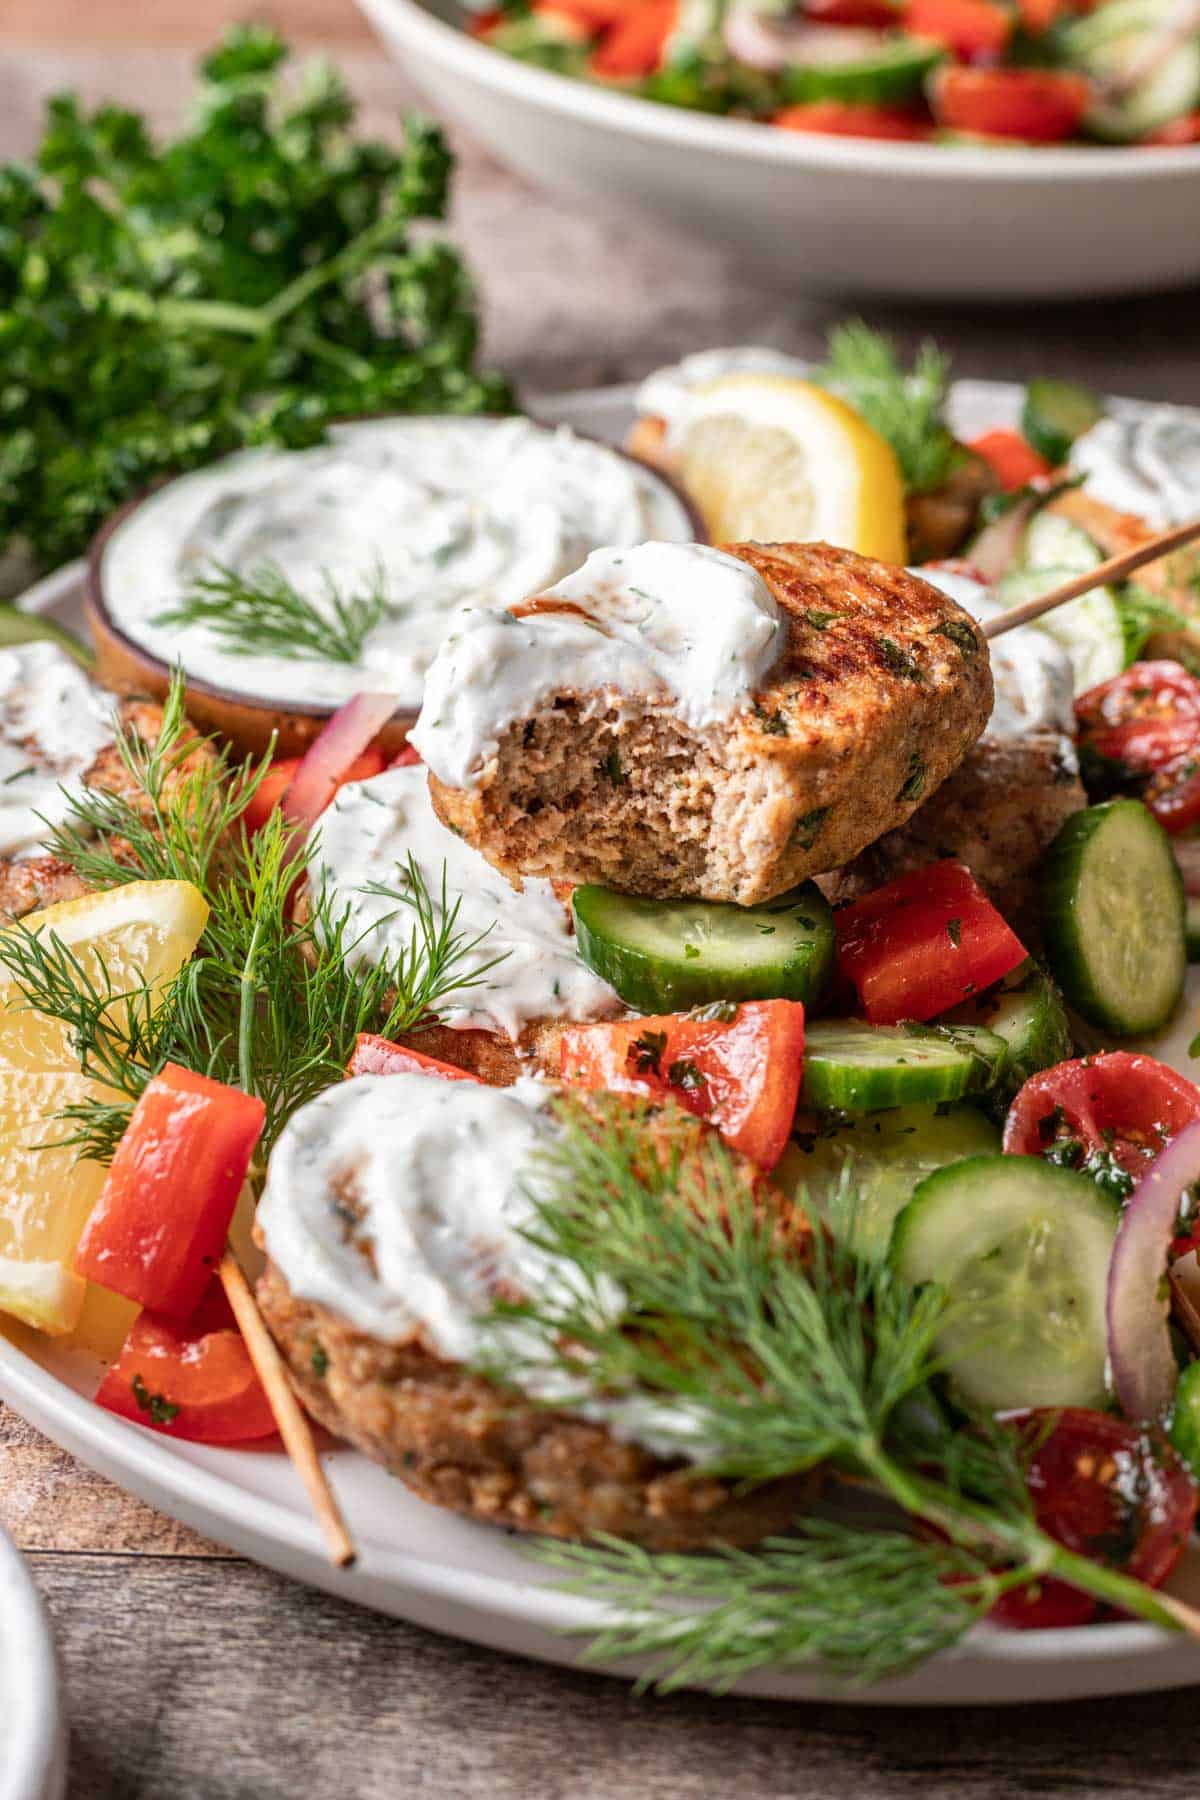 A chicken kofta kebab topped with yogurt sauce with a bite taken out.